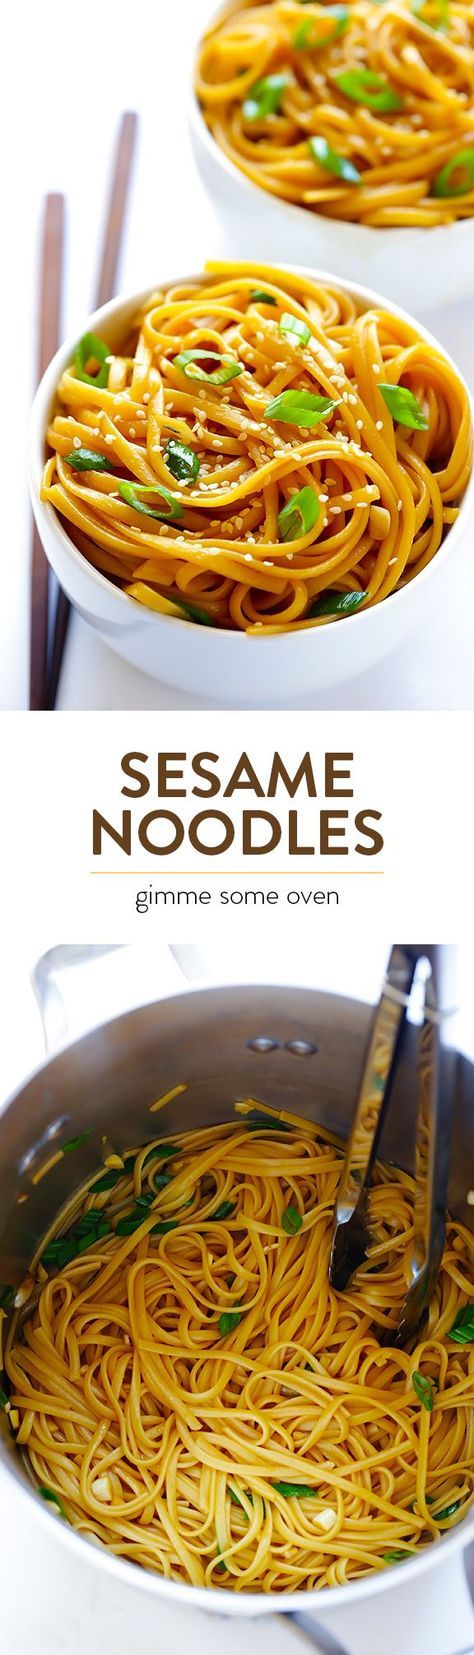 This tasty sesame noodles recipe is only one of many delicious ones you'll find in this awesome post. Click here to discover cheap recipes for 2. #healthyrecipes #healthymeals #healthyeating #healthylife #mealprep #nobake #nutrition #wellness